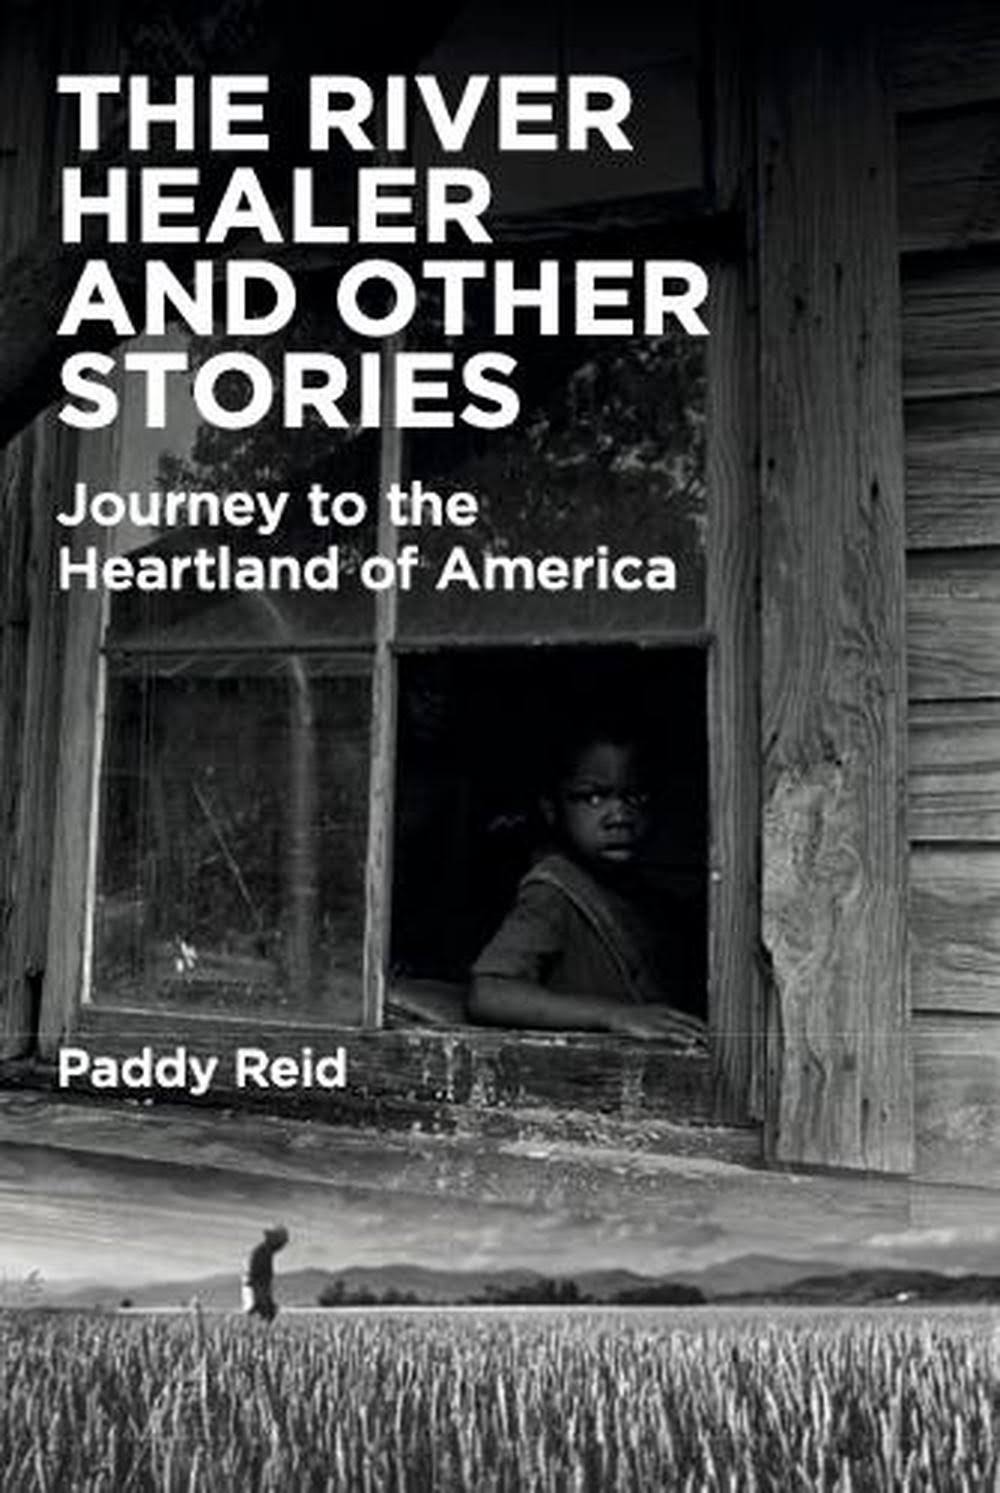 The River Healer and Other Stories by Paddy Reid